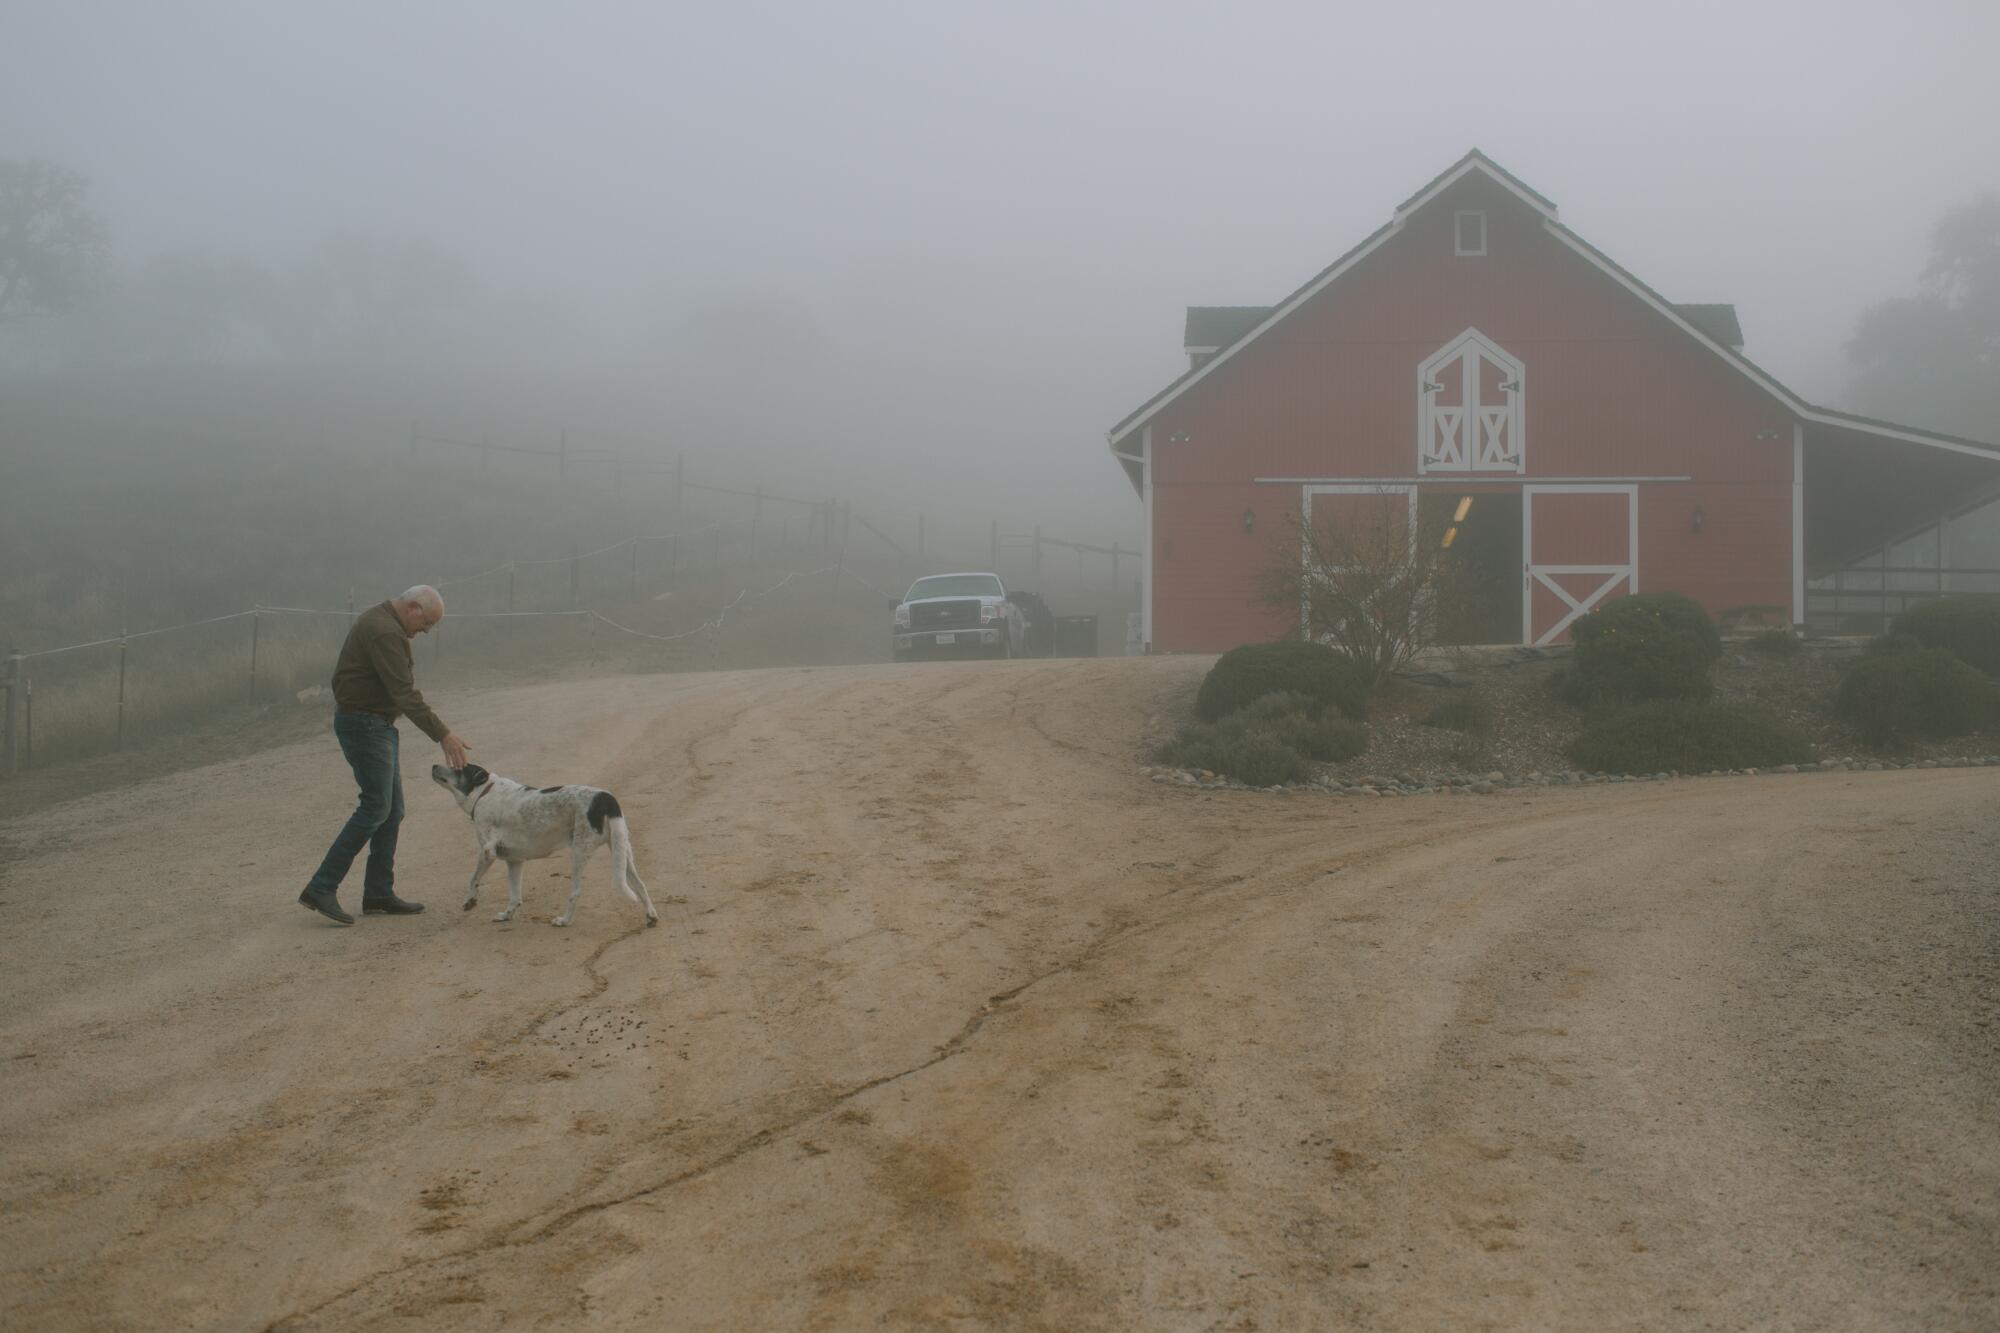 A man reaching for a black-and-white dog on a dirt road leading to a red barn